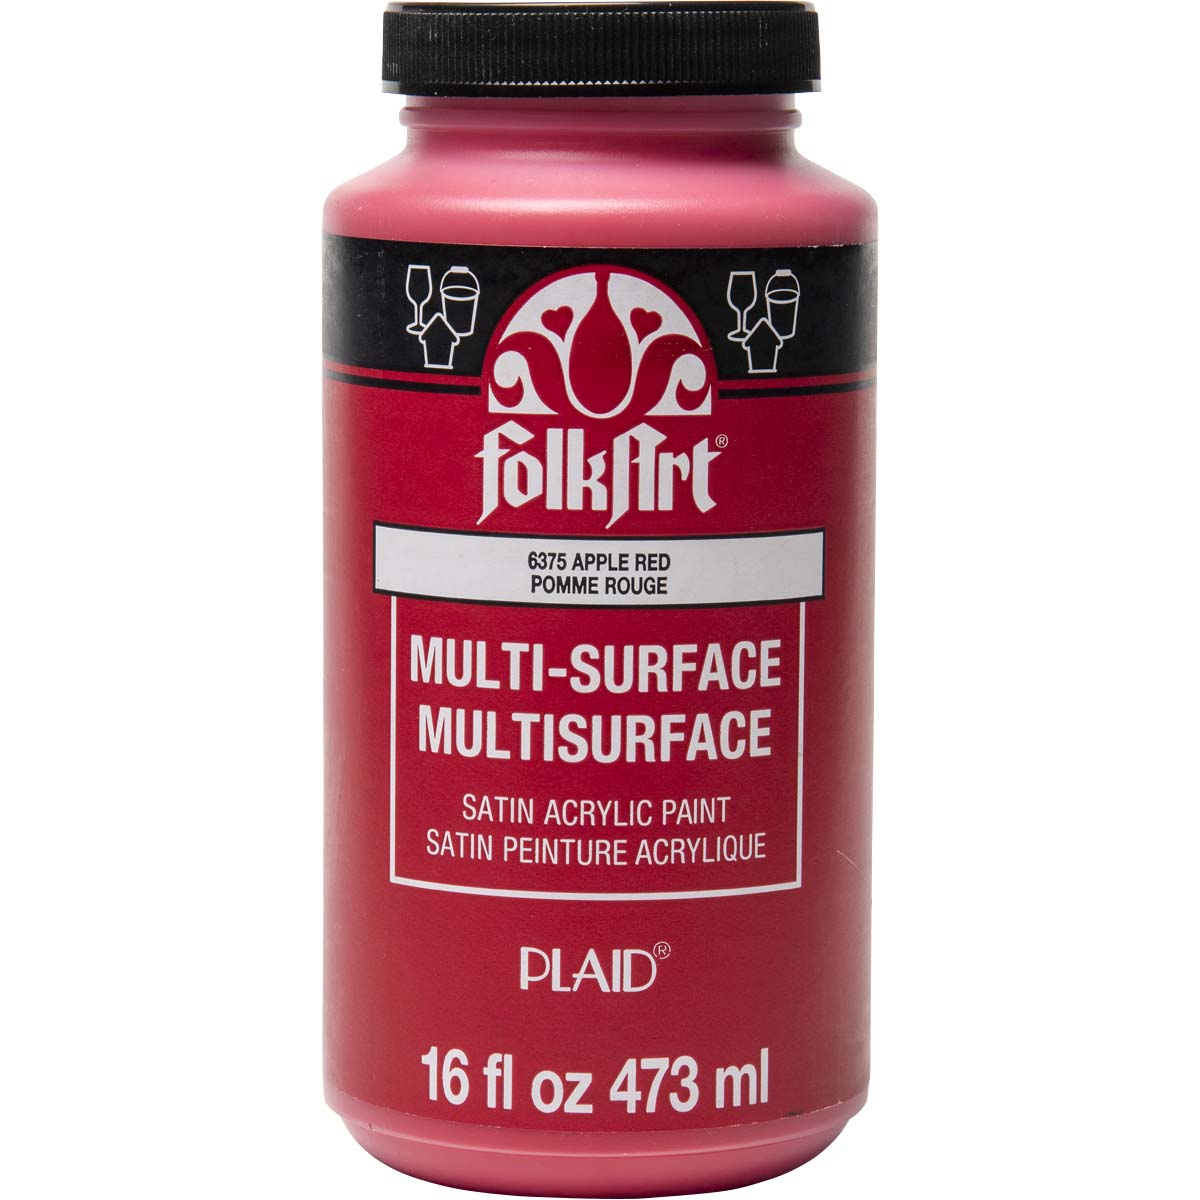 FolkArt Multi-Surface Satin Acrylic Paint in Assorted Colors, 16